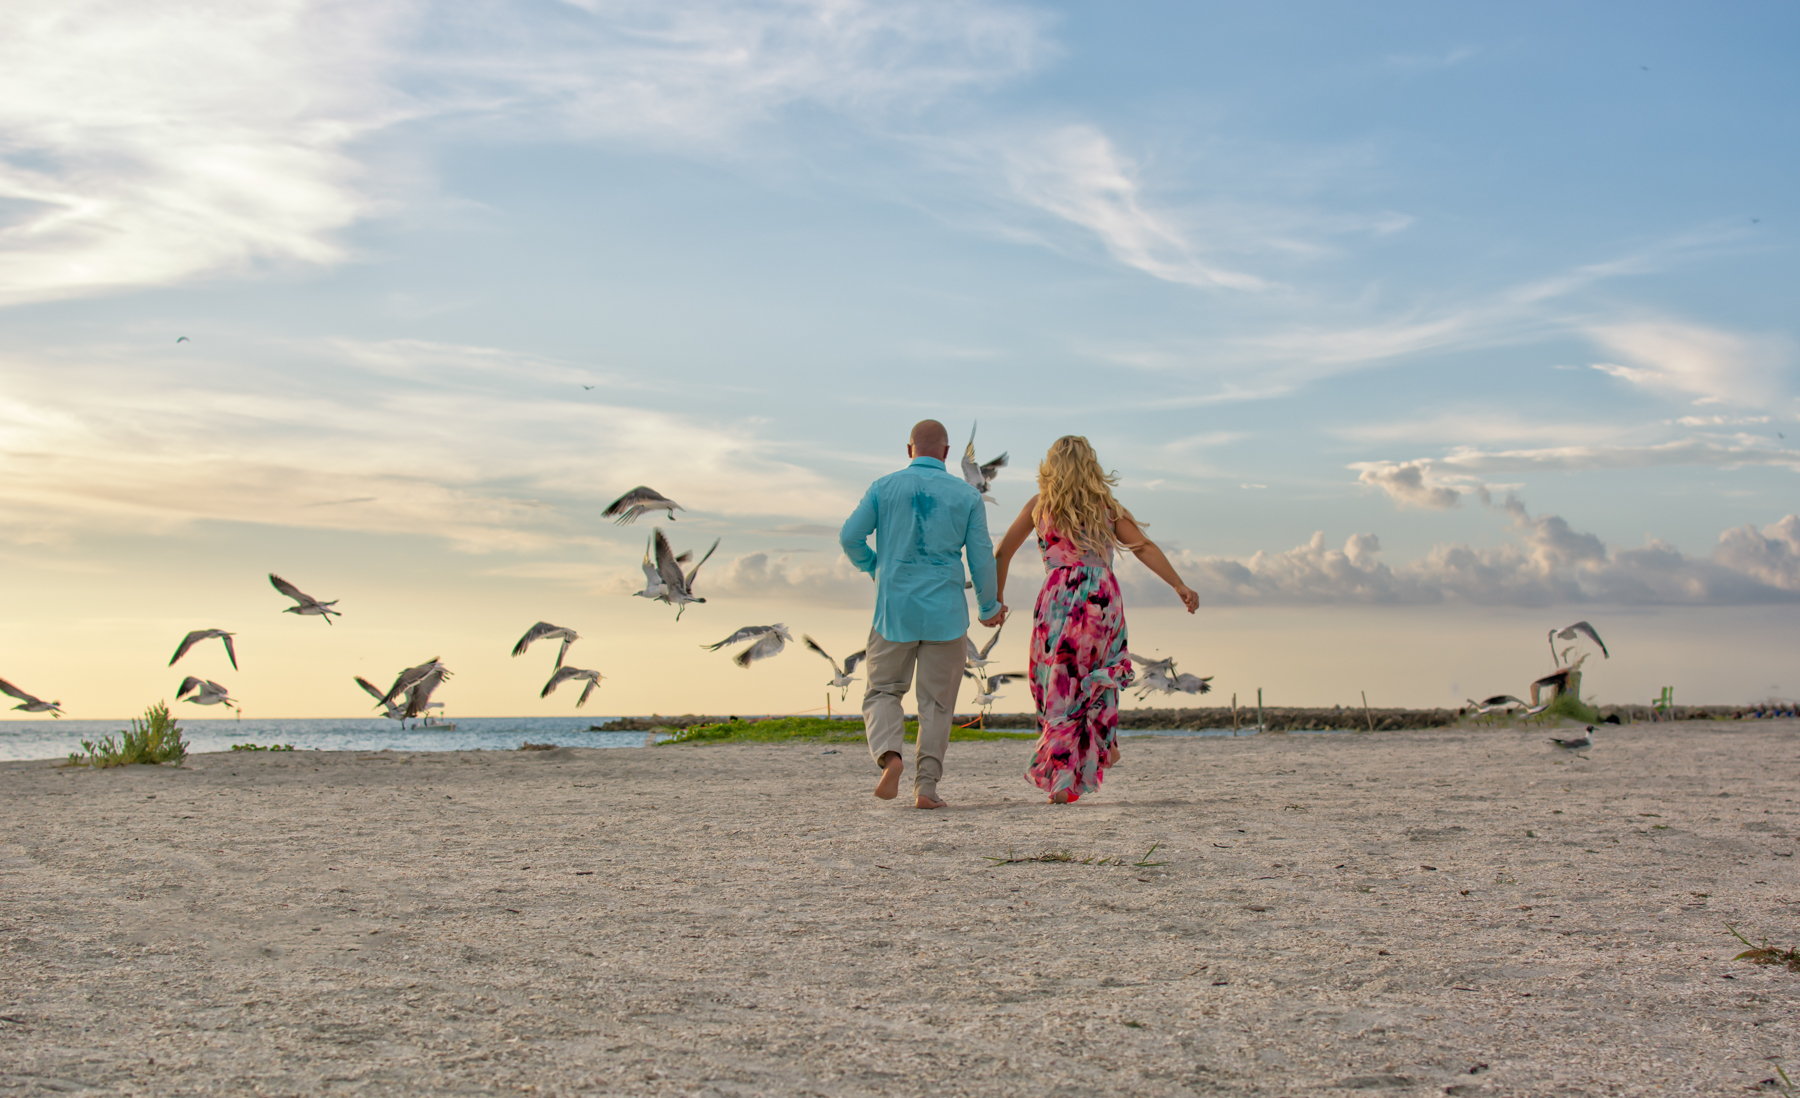 Clearwater Beach Photographers 2019 Sample Images 5